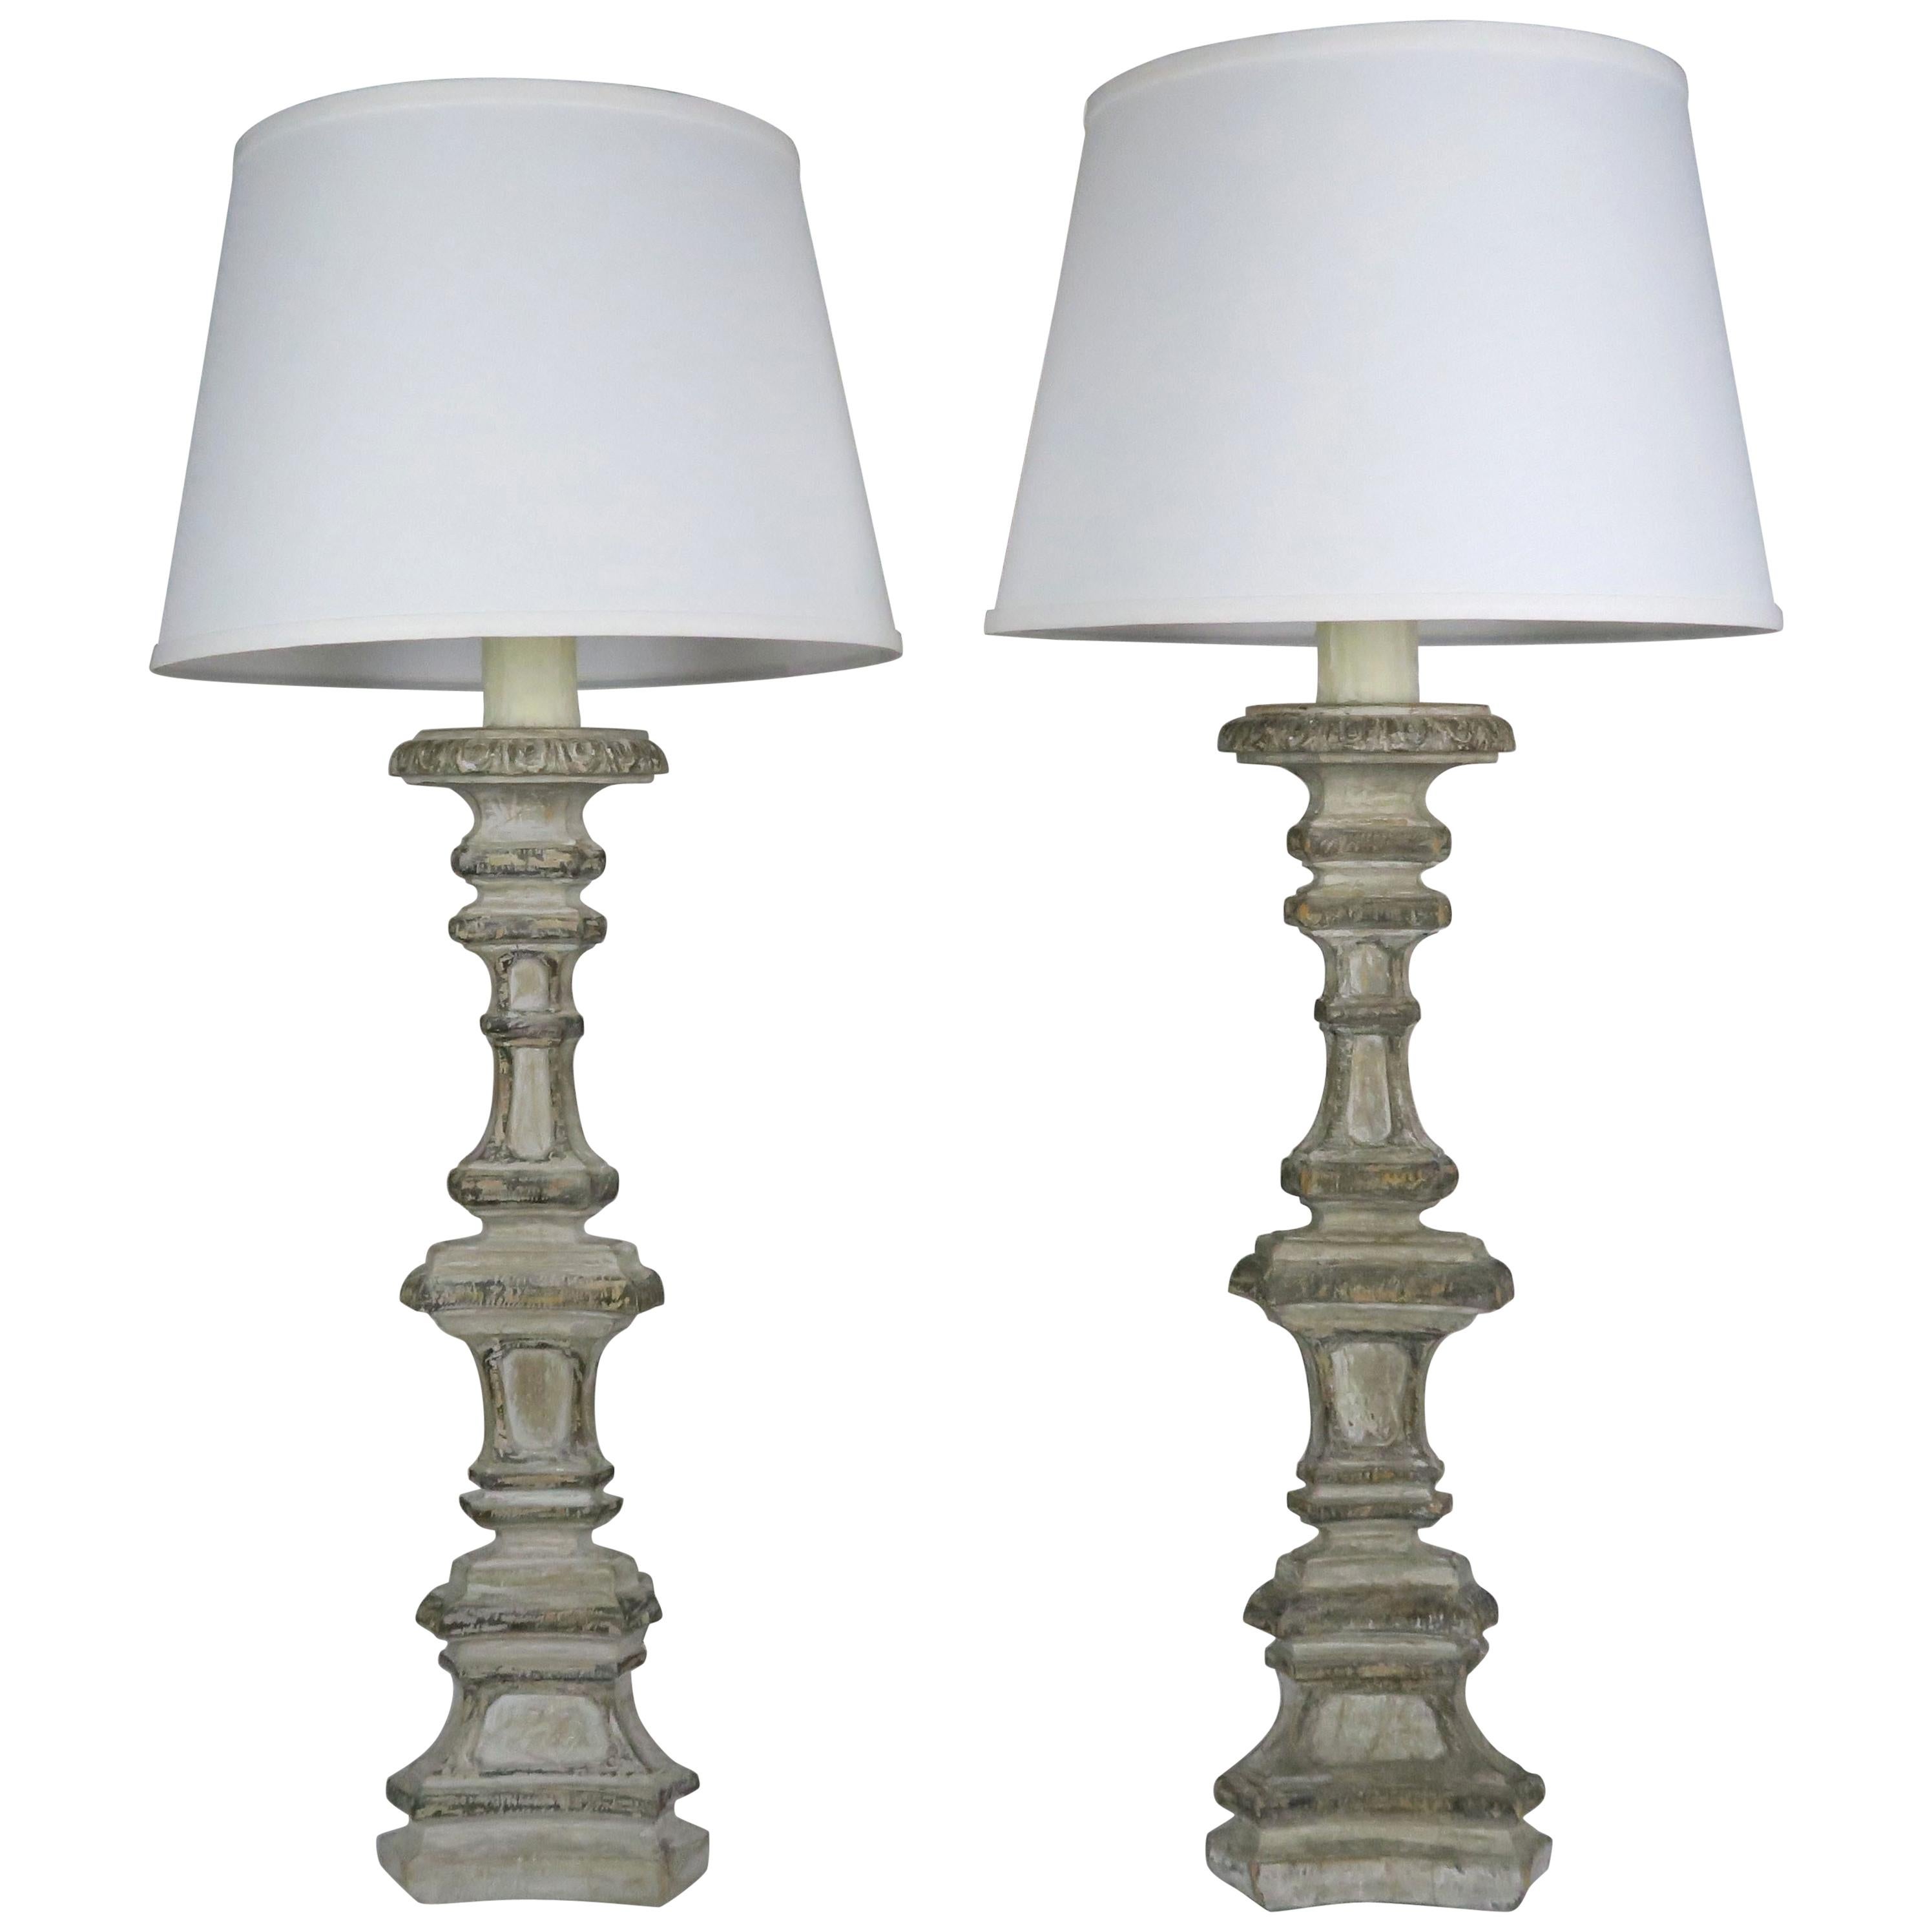 Pair of Italian Painted Candlestick Lamps with Linen Shades